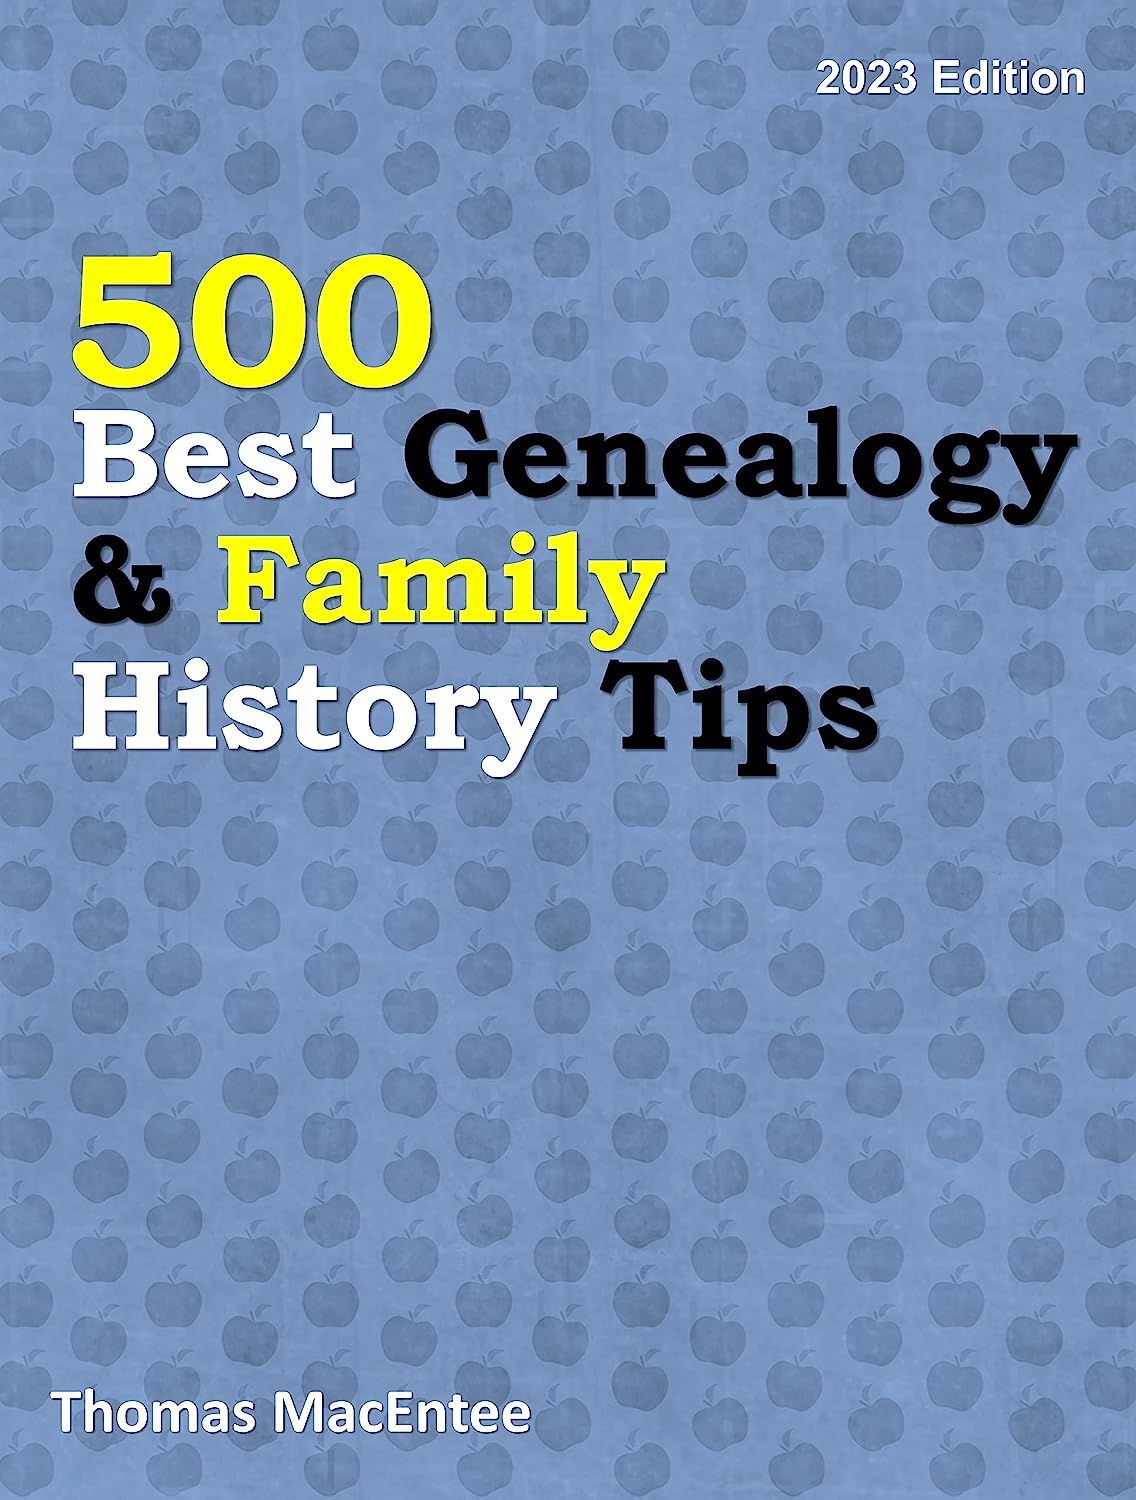 My best-selling book, 500 Best Genealogy & Family History Tips  has been UPDATE in the new 2023 edition. And now through Wednesday, July 12th, you can download it for FREE!